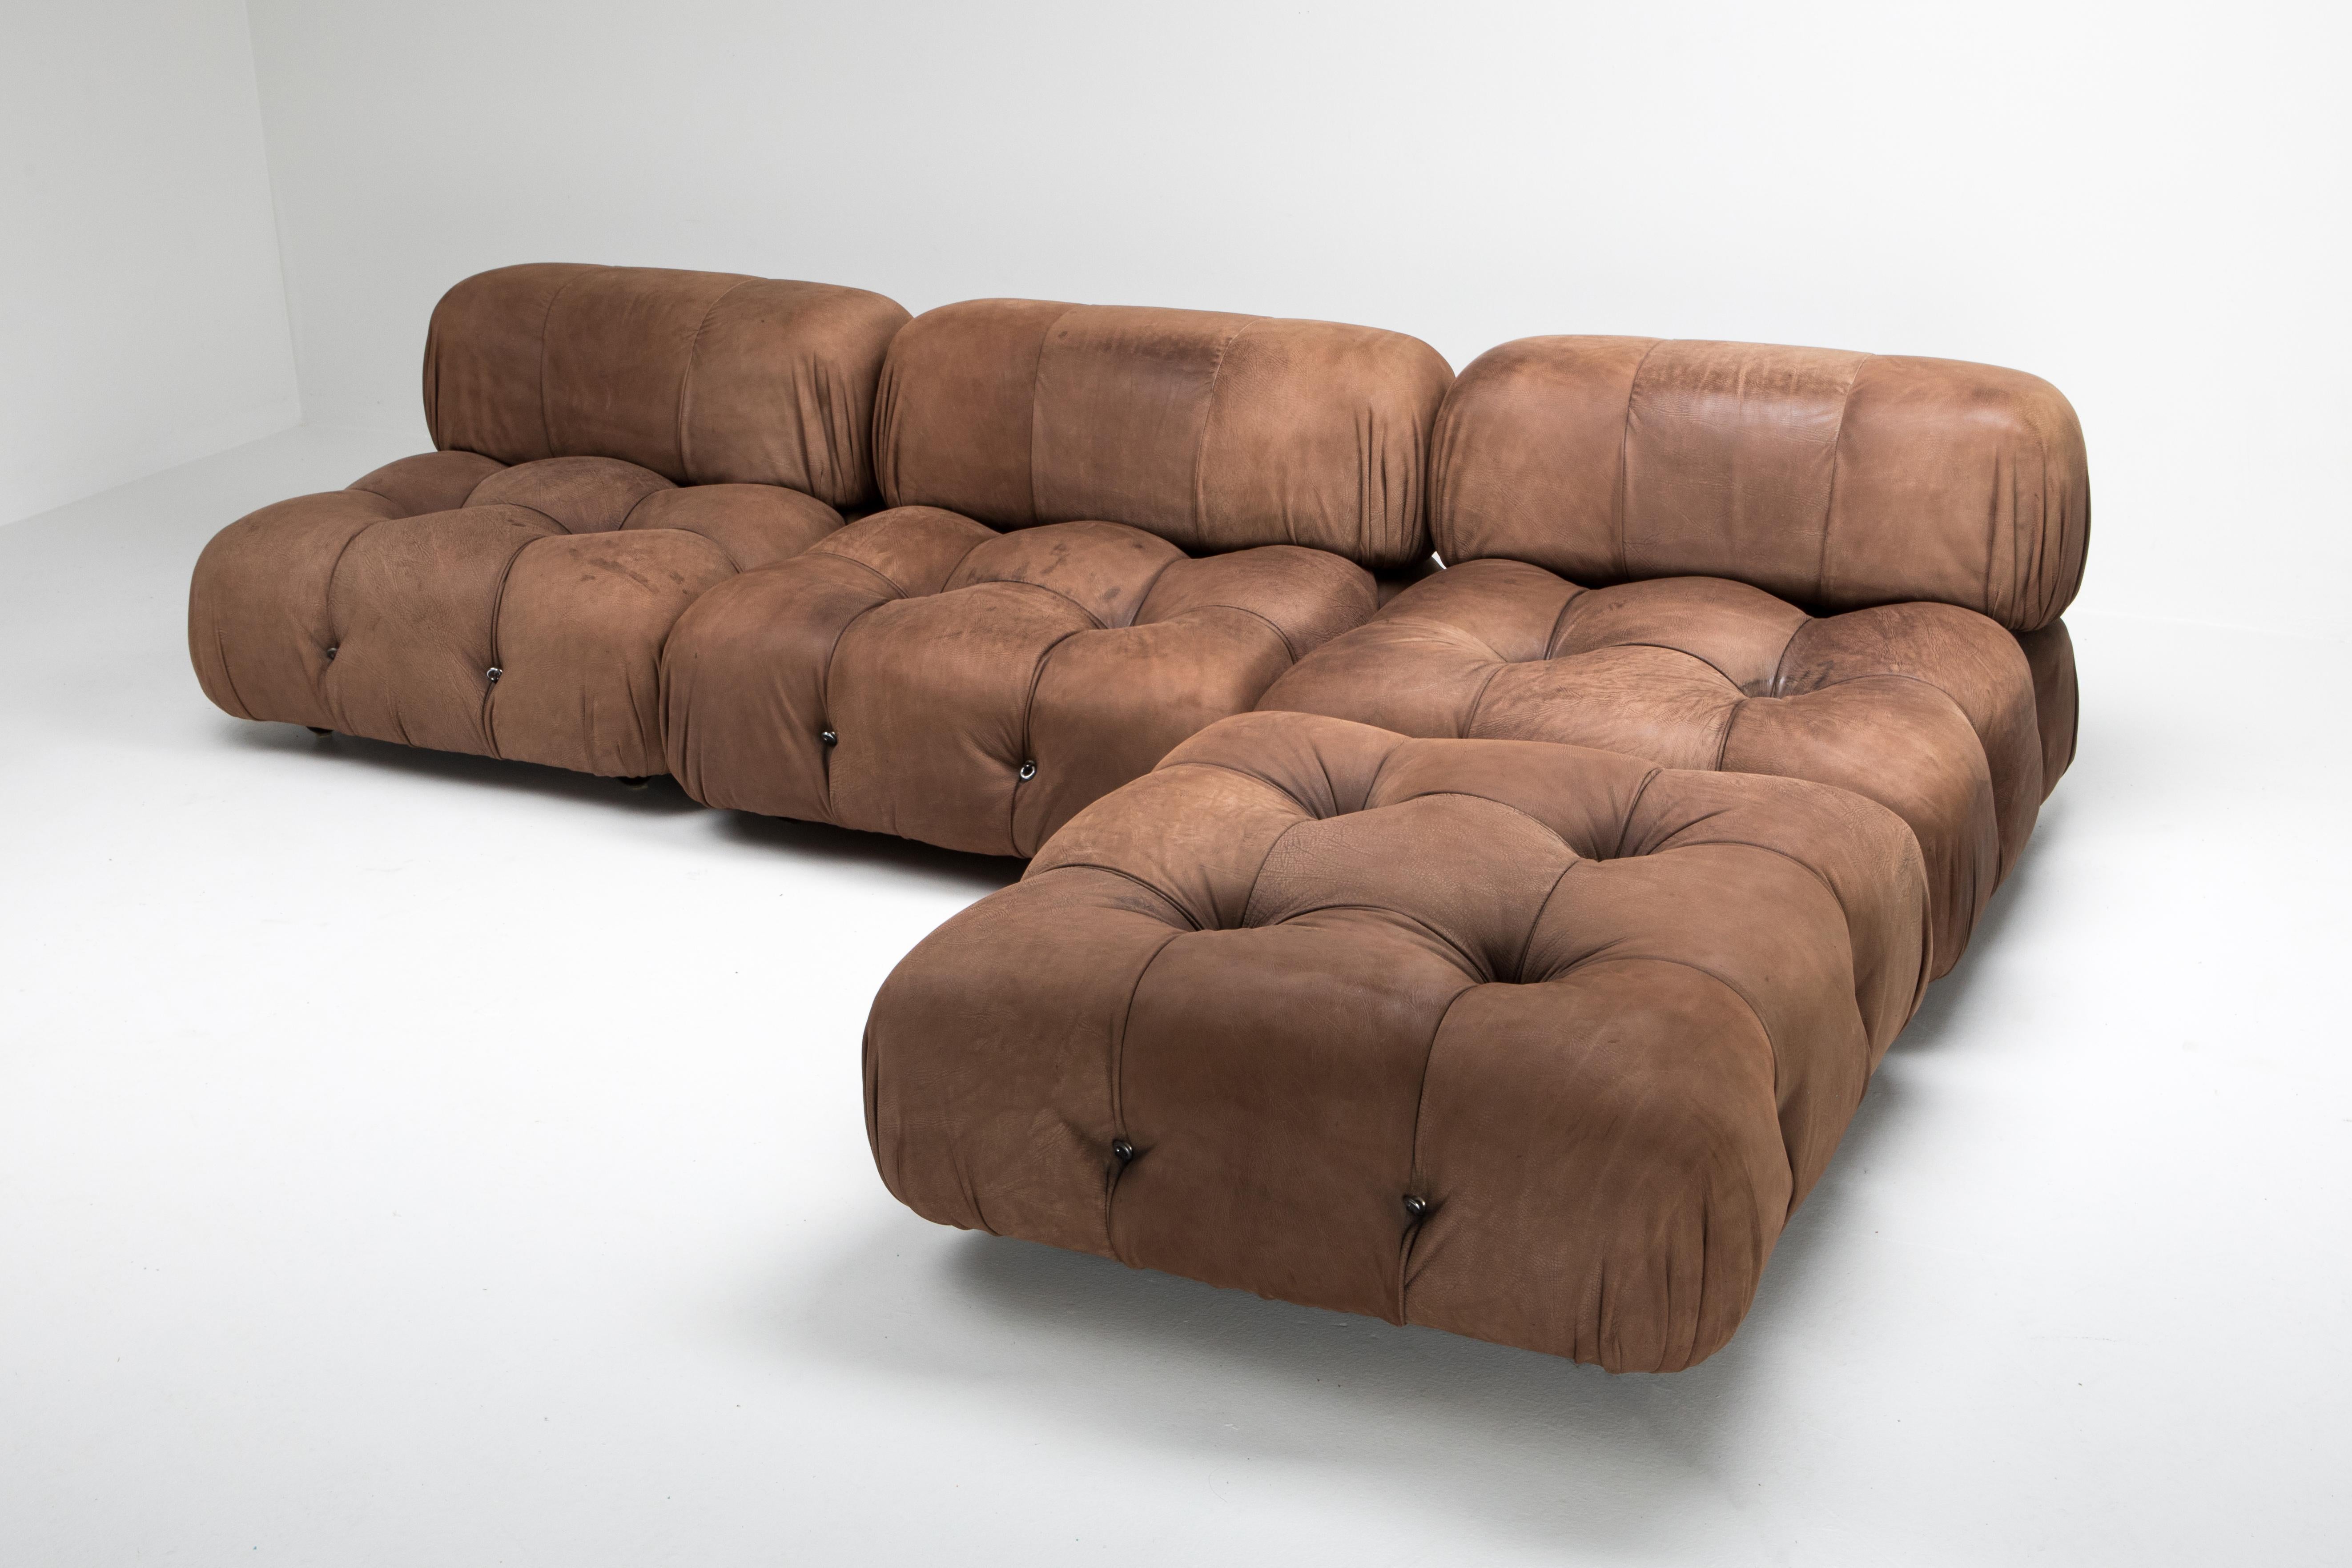 Mario Bellini 'Camaleonda' sectional couch in original brown buffalo leather, C&B Italia, 1970s

These are our best camaleonda pieces we've ever had.

Postmodern sectional piece by Mario Bellini for C&B Italia The entire listing consists of 4